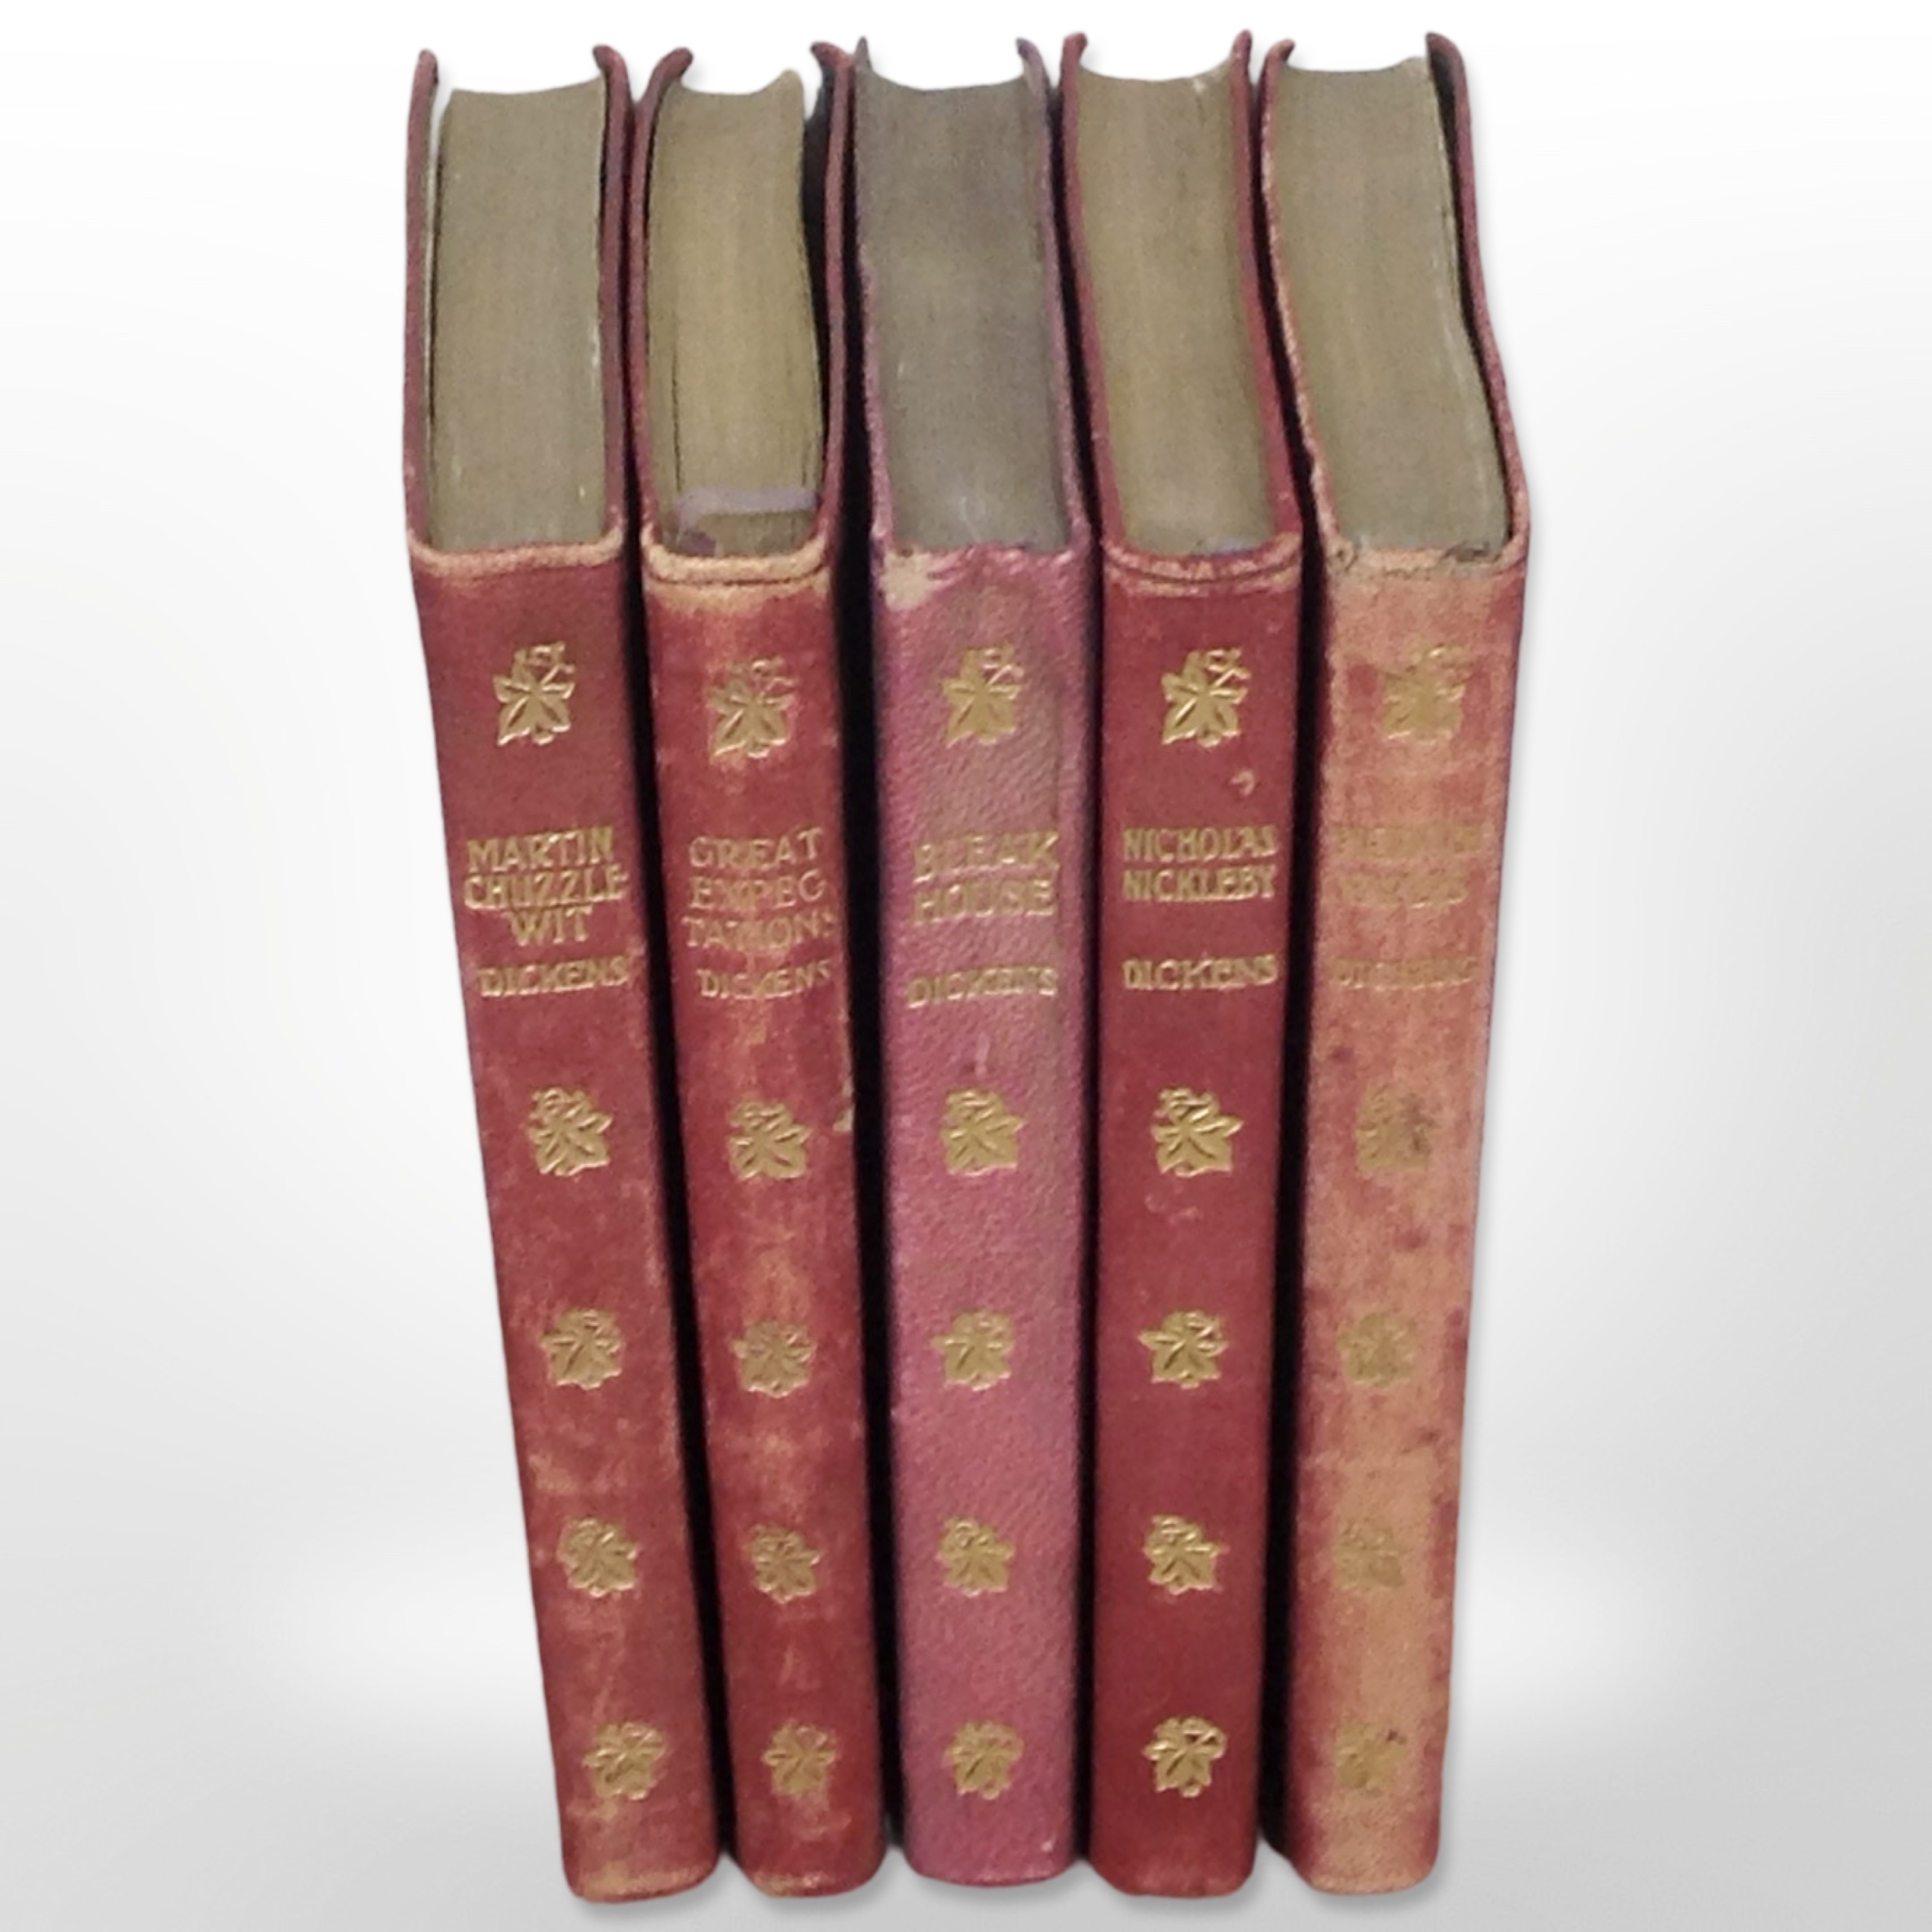 Five Charles Dickens volumes published by Thomas Nelson & Sons, in gilt leather binding.